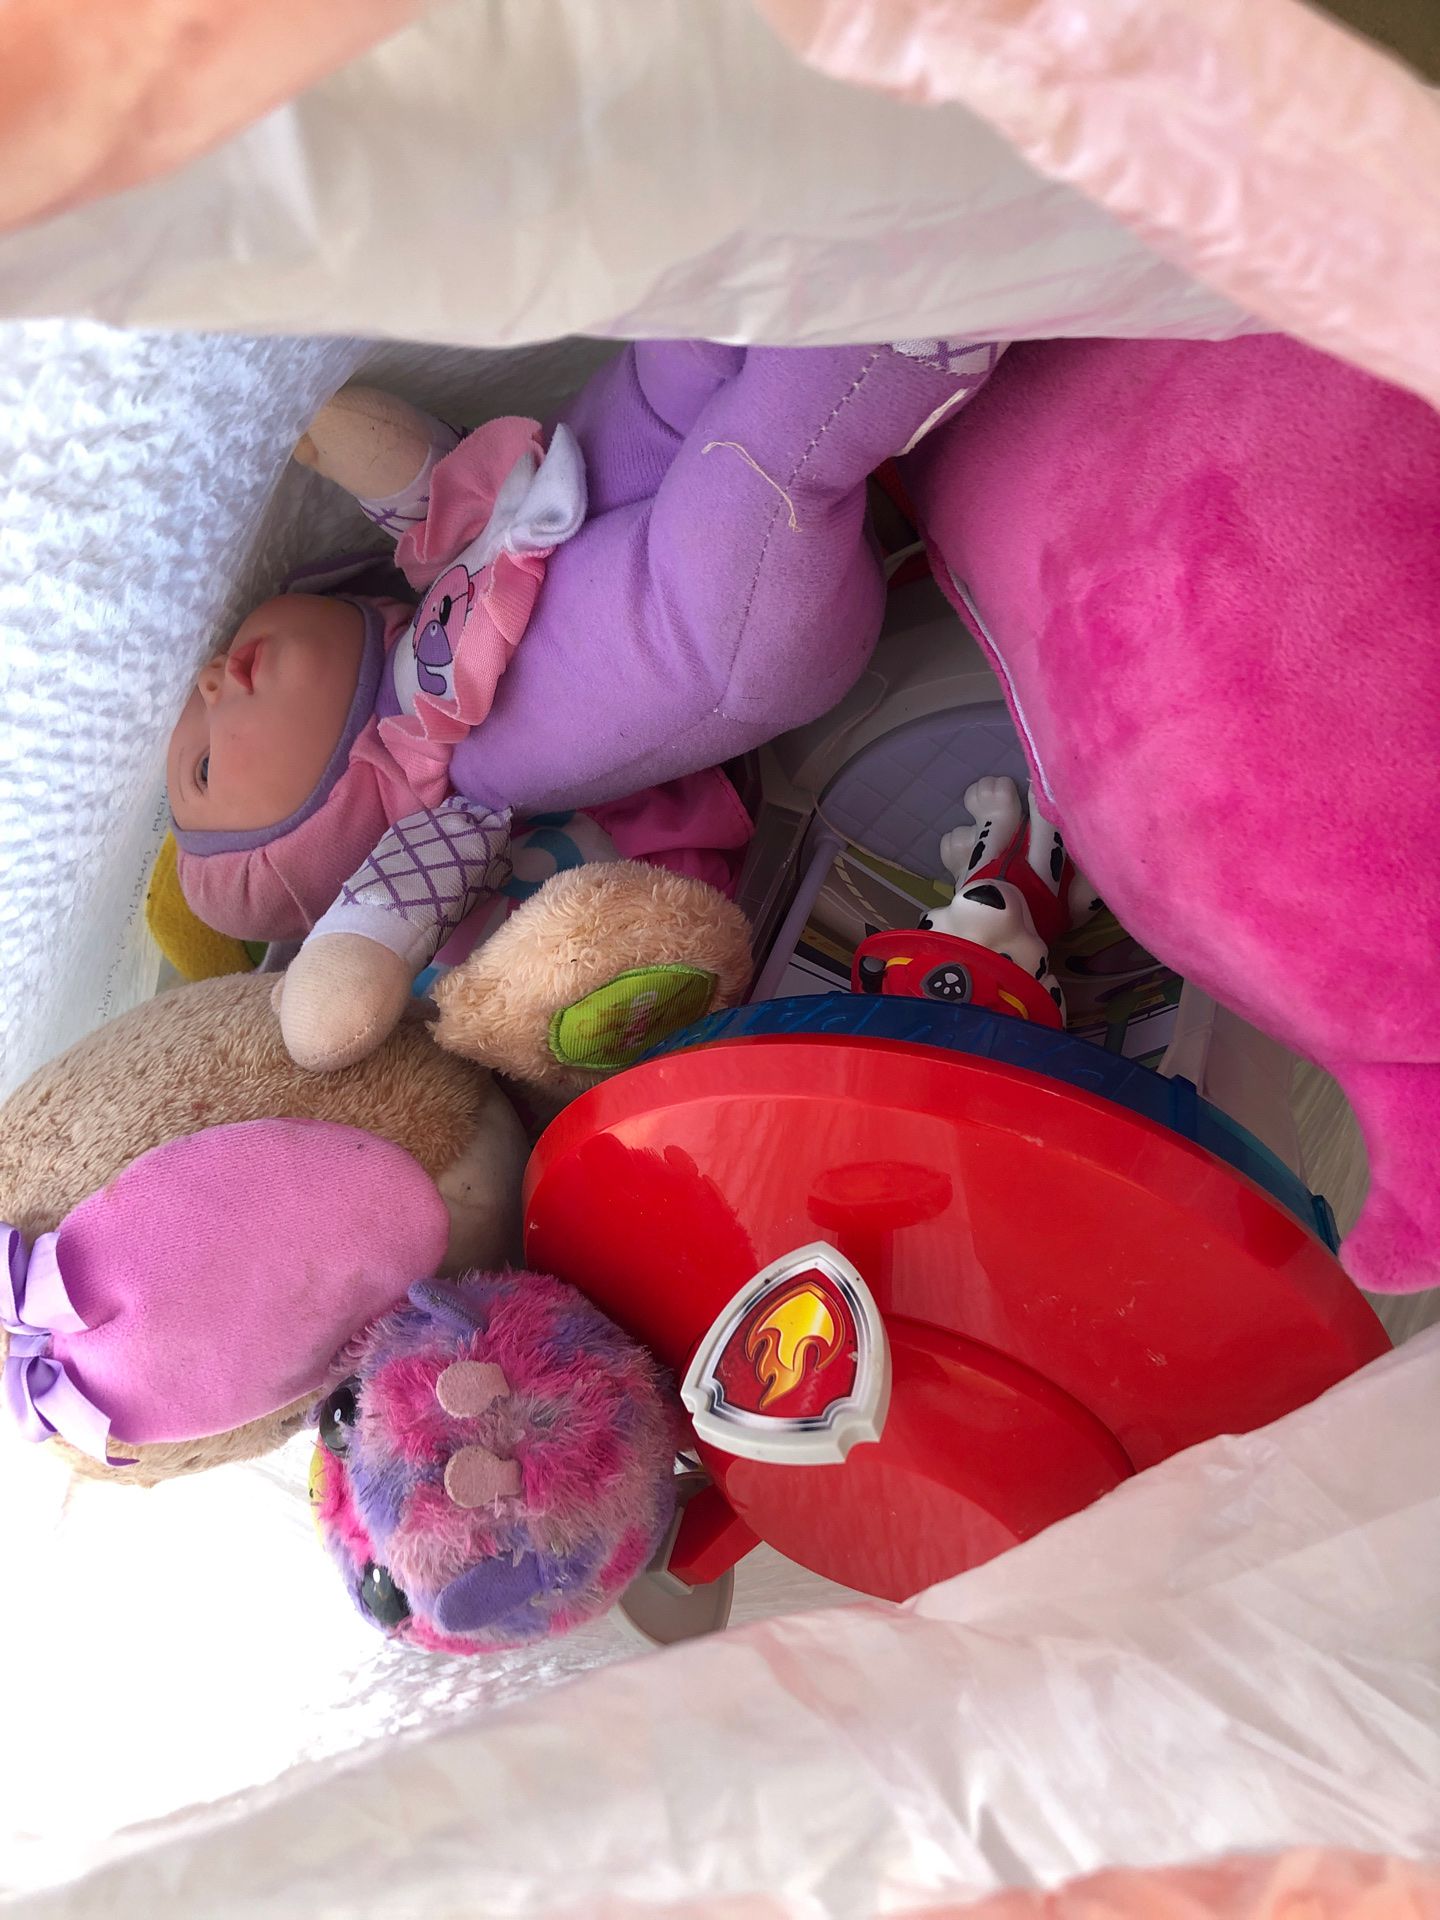 Free dolly’s, stuffed animals, toys